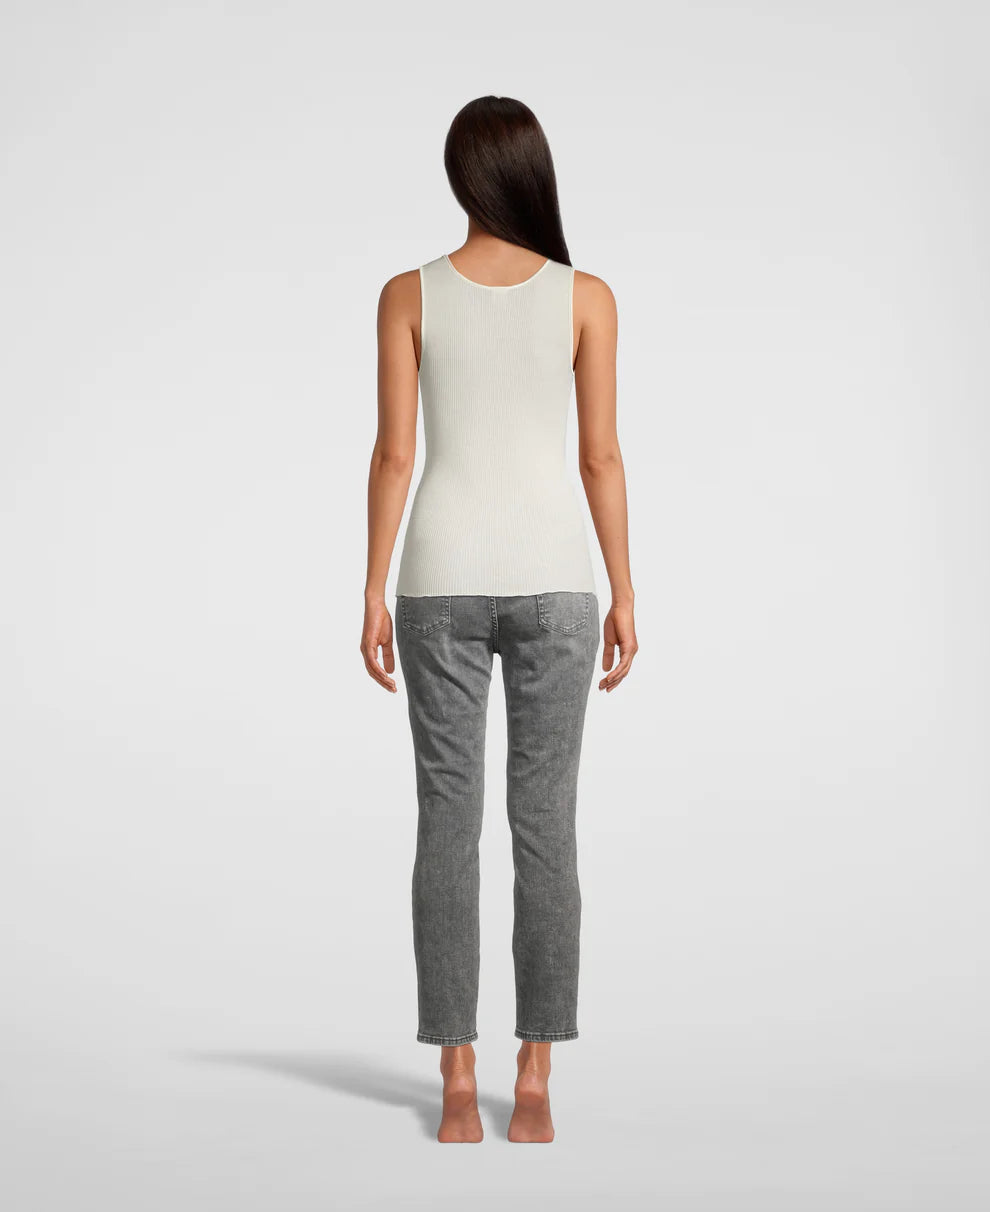 Oscalito Wool and Silk Tank Top with Satin Edging